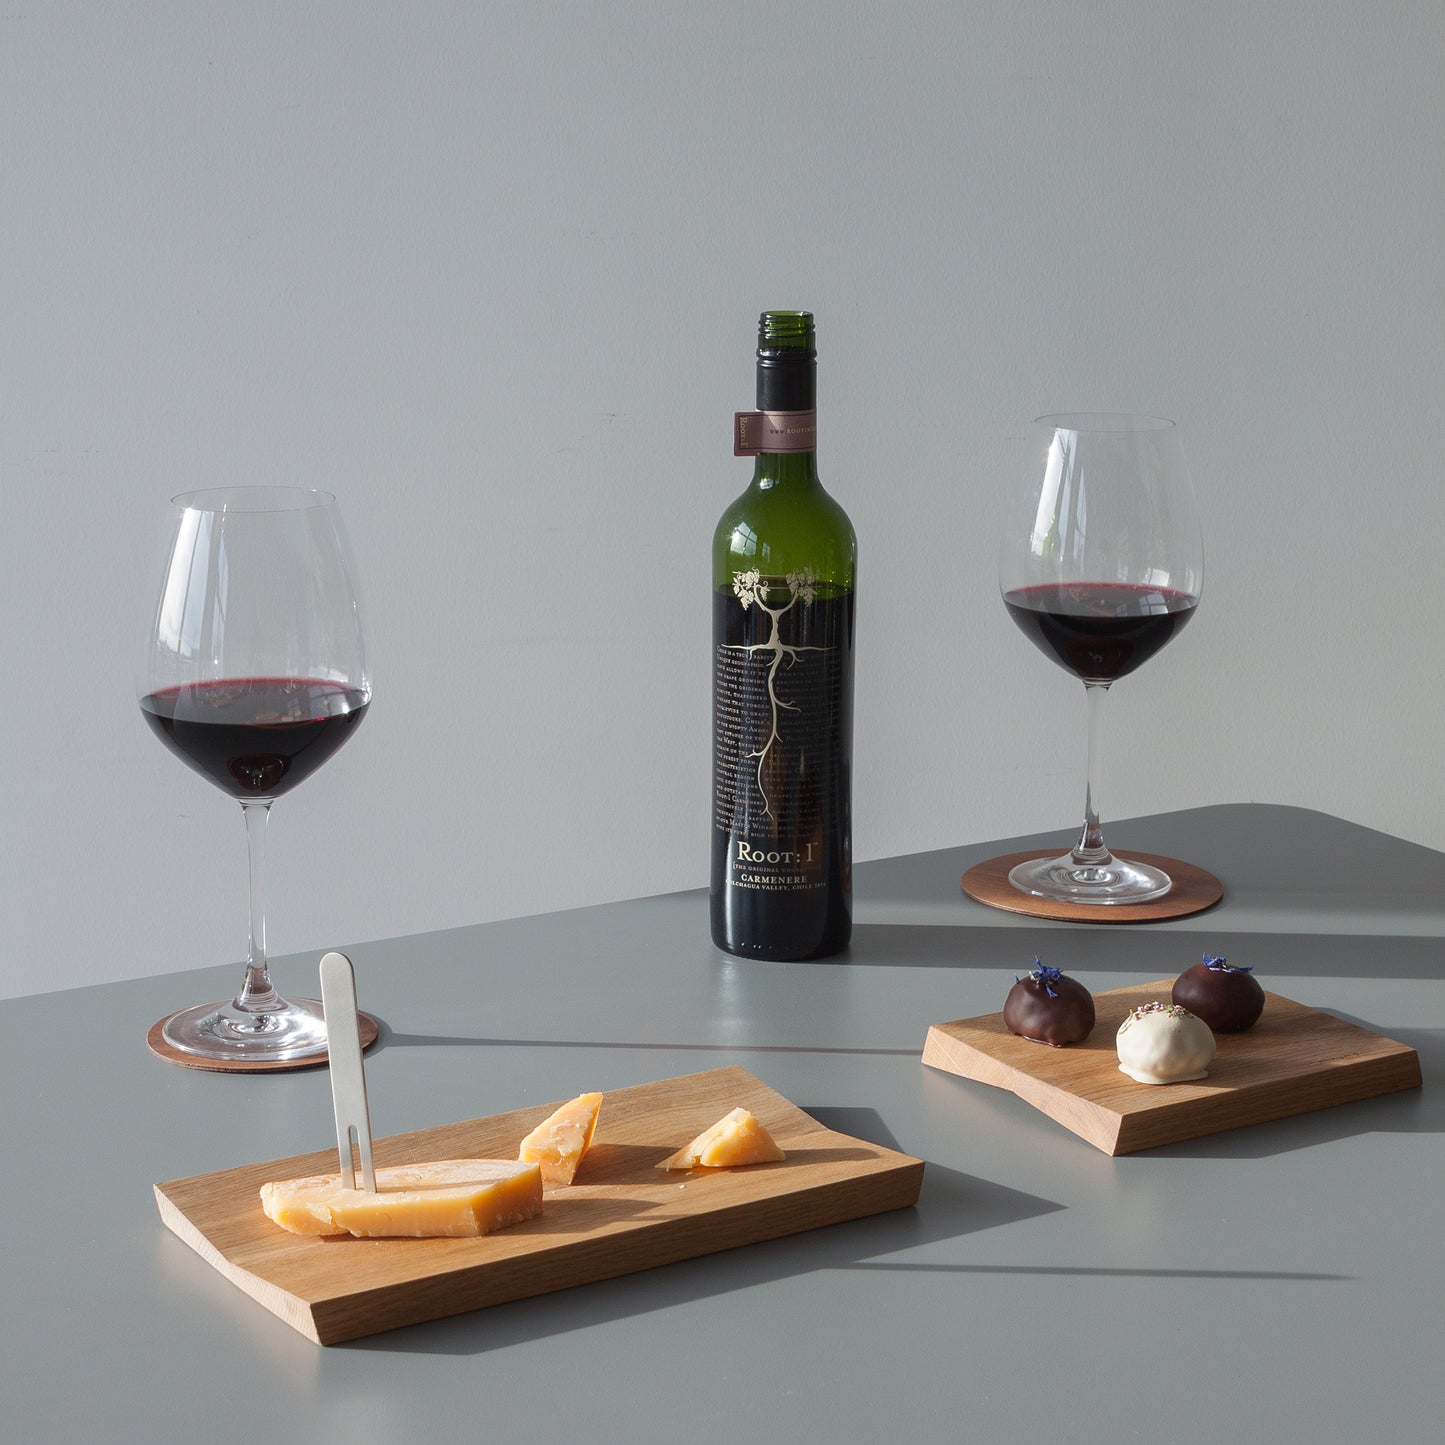 Minimal design home decor for serving on the party table with wine and cheese and truffels 